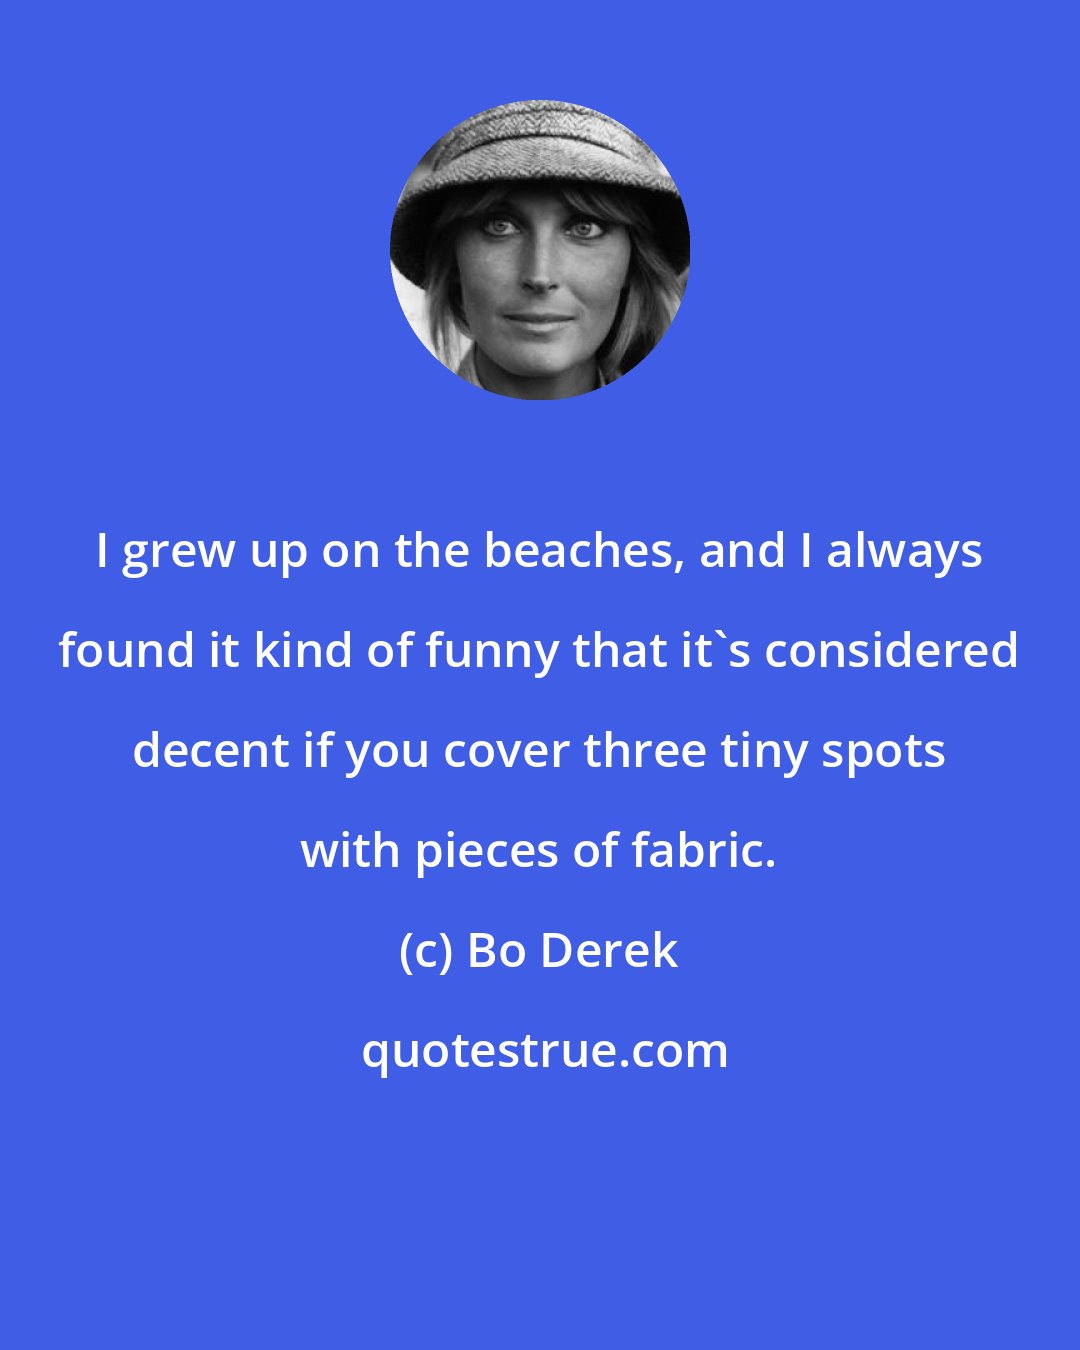 Bo Derek: I grew up on the beaches, and I always found it kind of funny that it's considered decent if you cover three tiny spots with pieces of fabric.